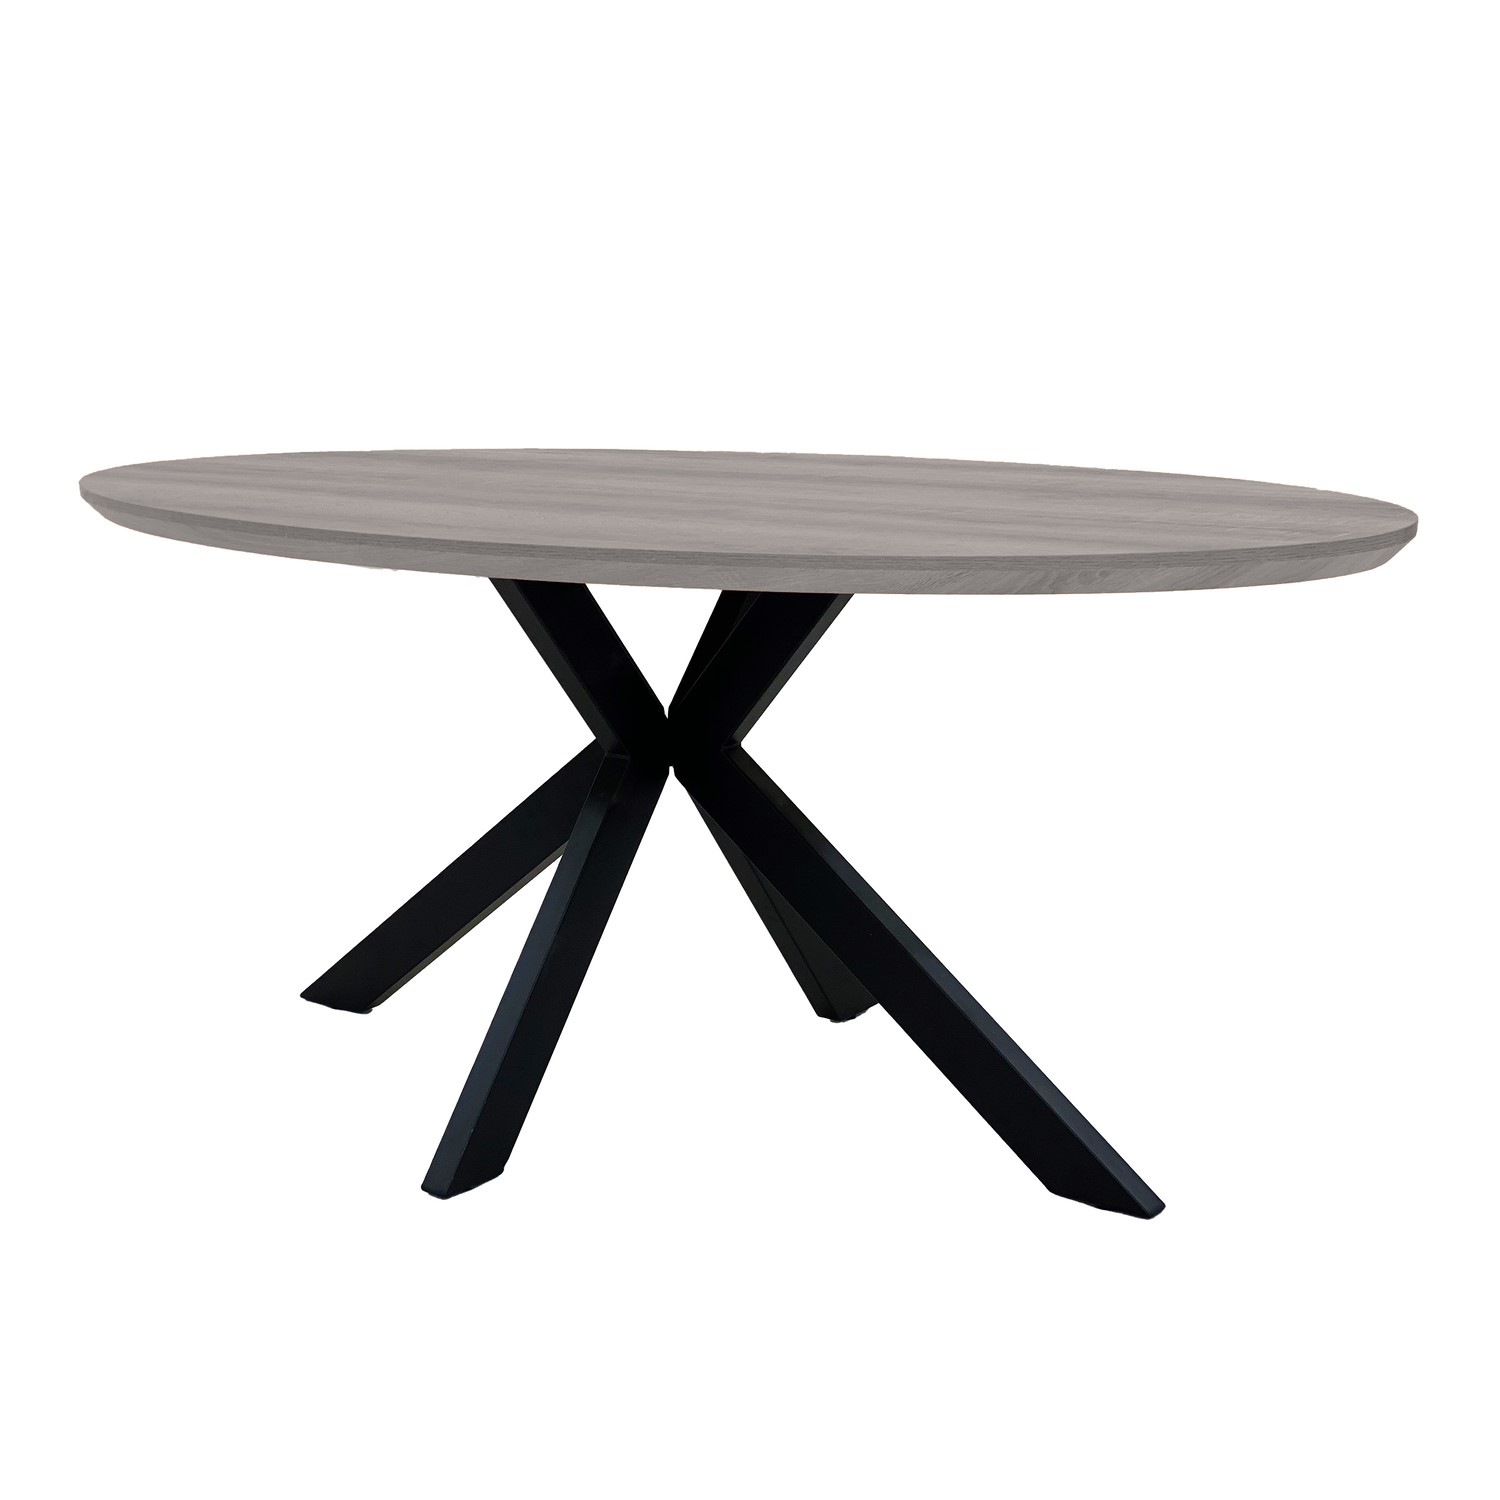 Read more about Large oval wood effect dining table seats 6 liberty